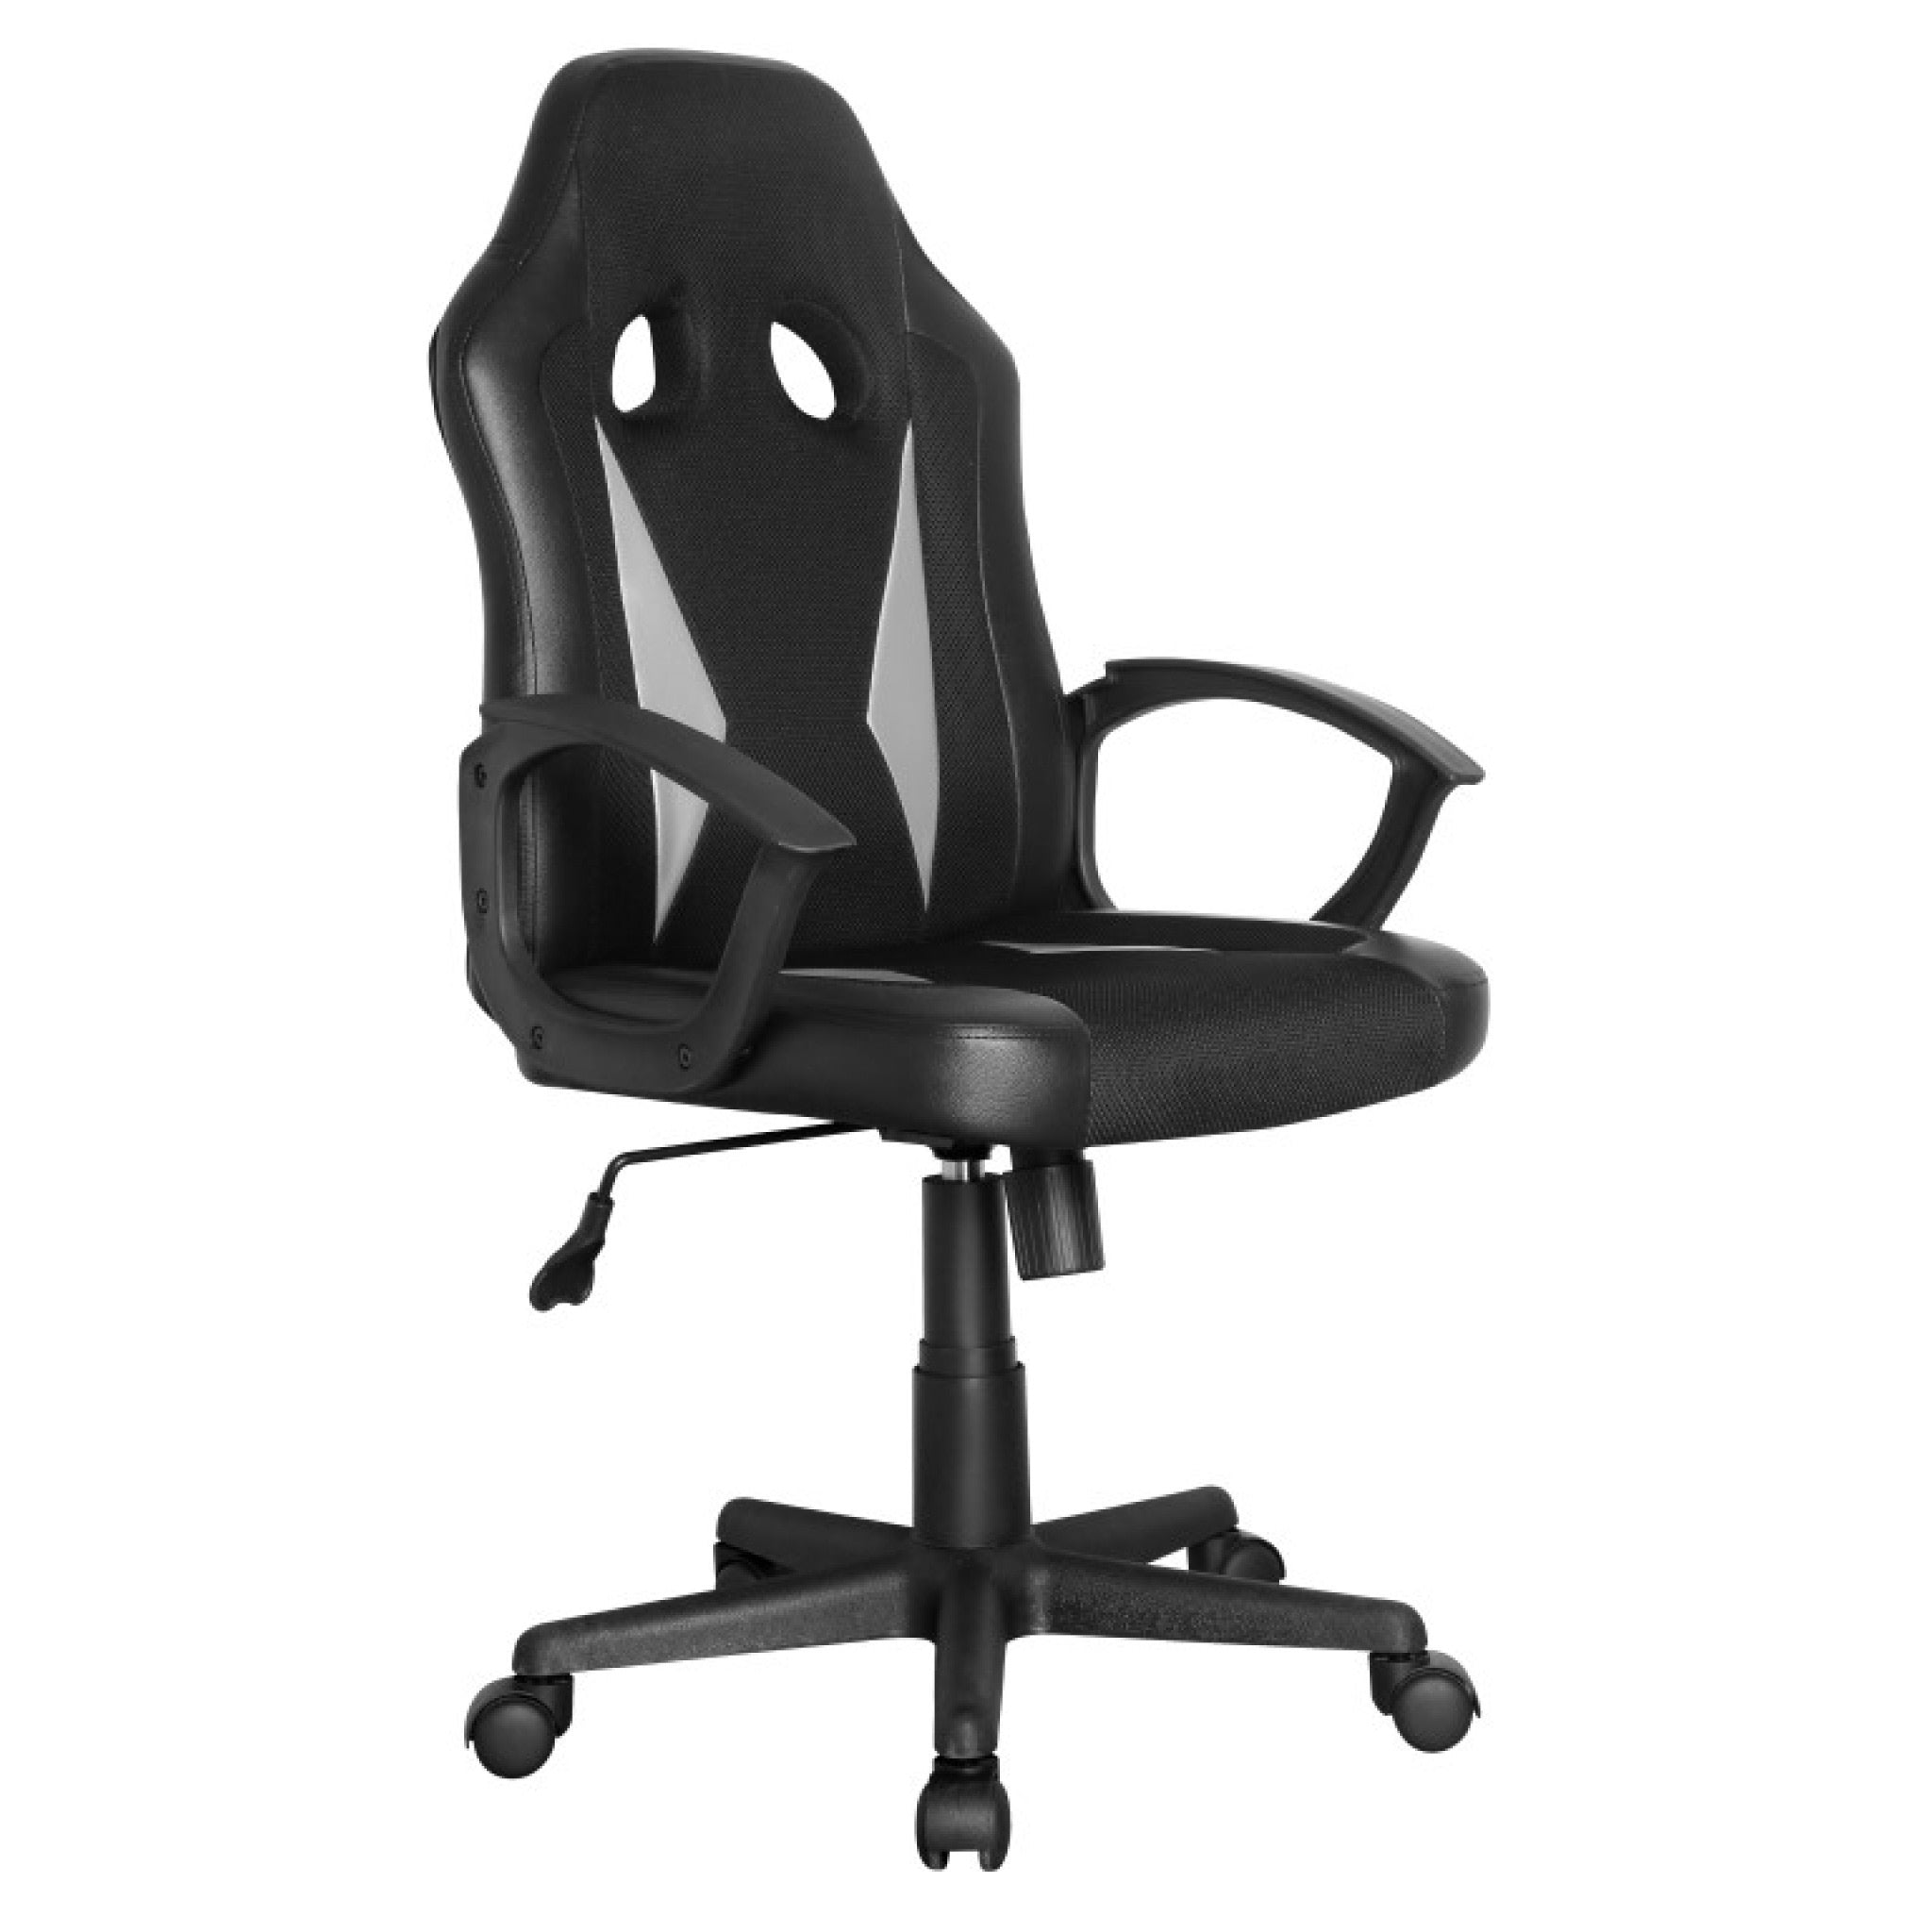 Mailou Office Chair - Grey